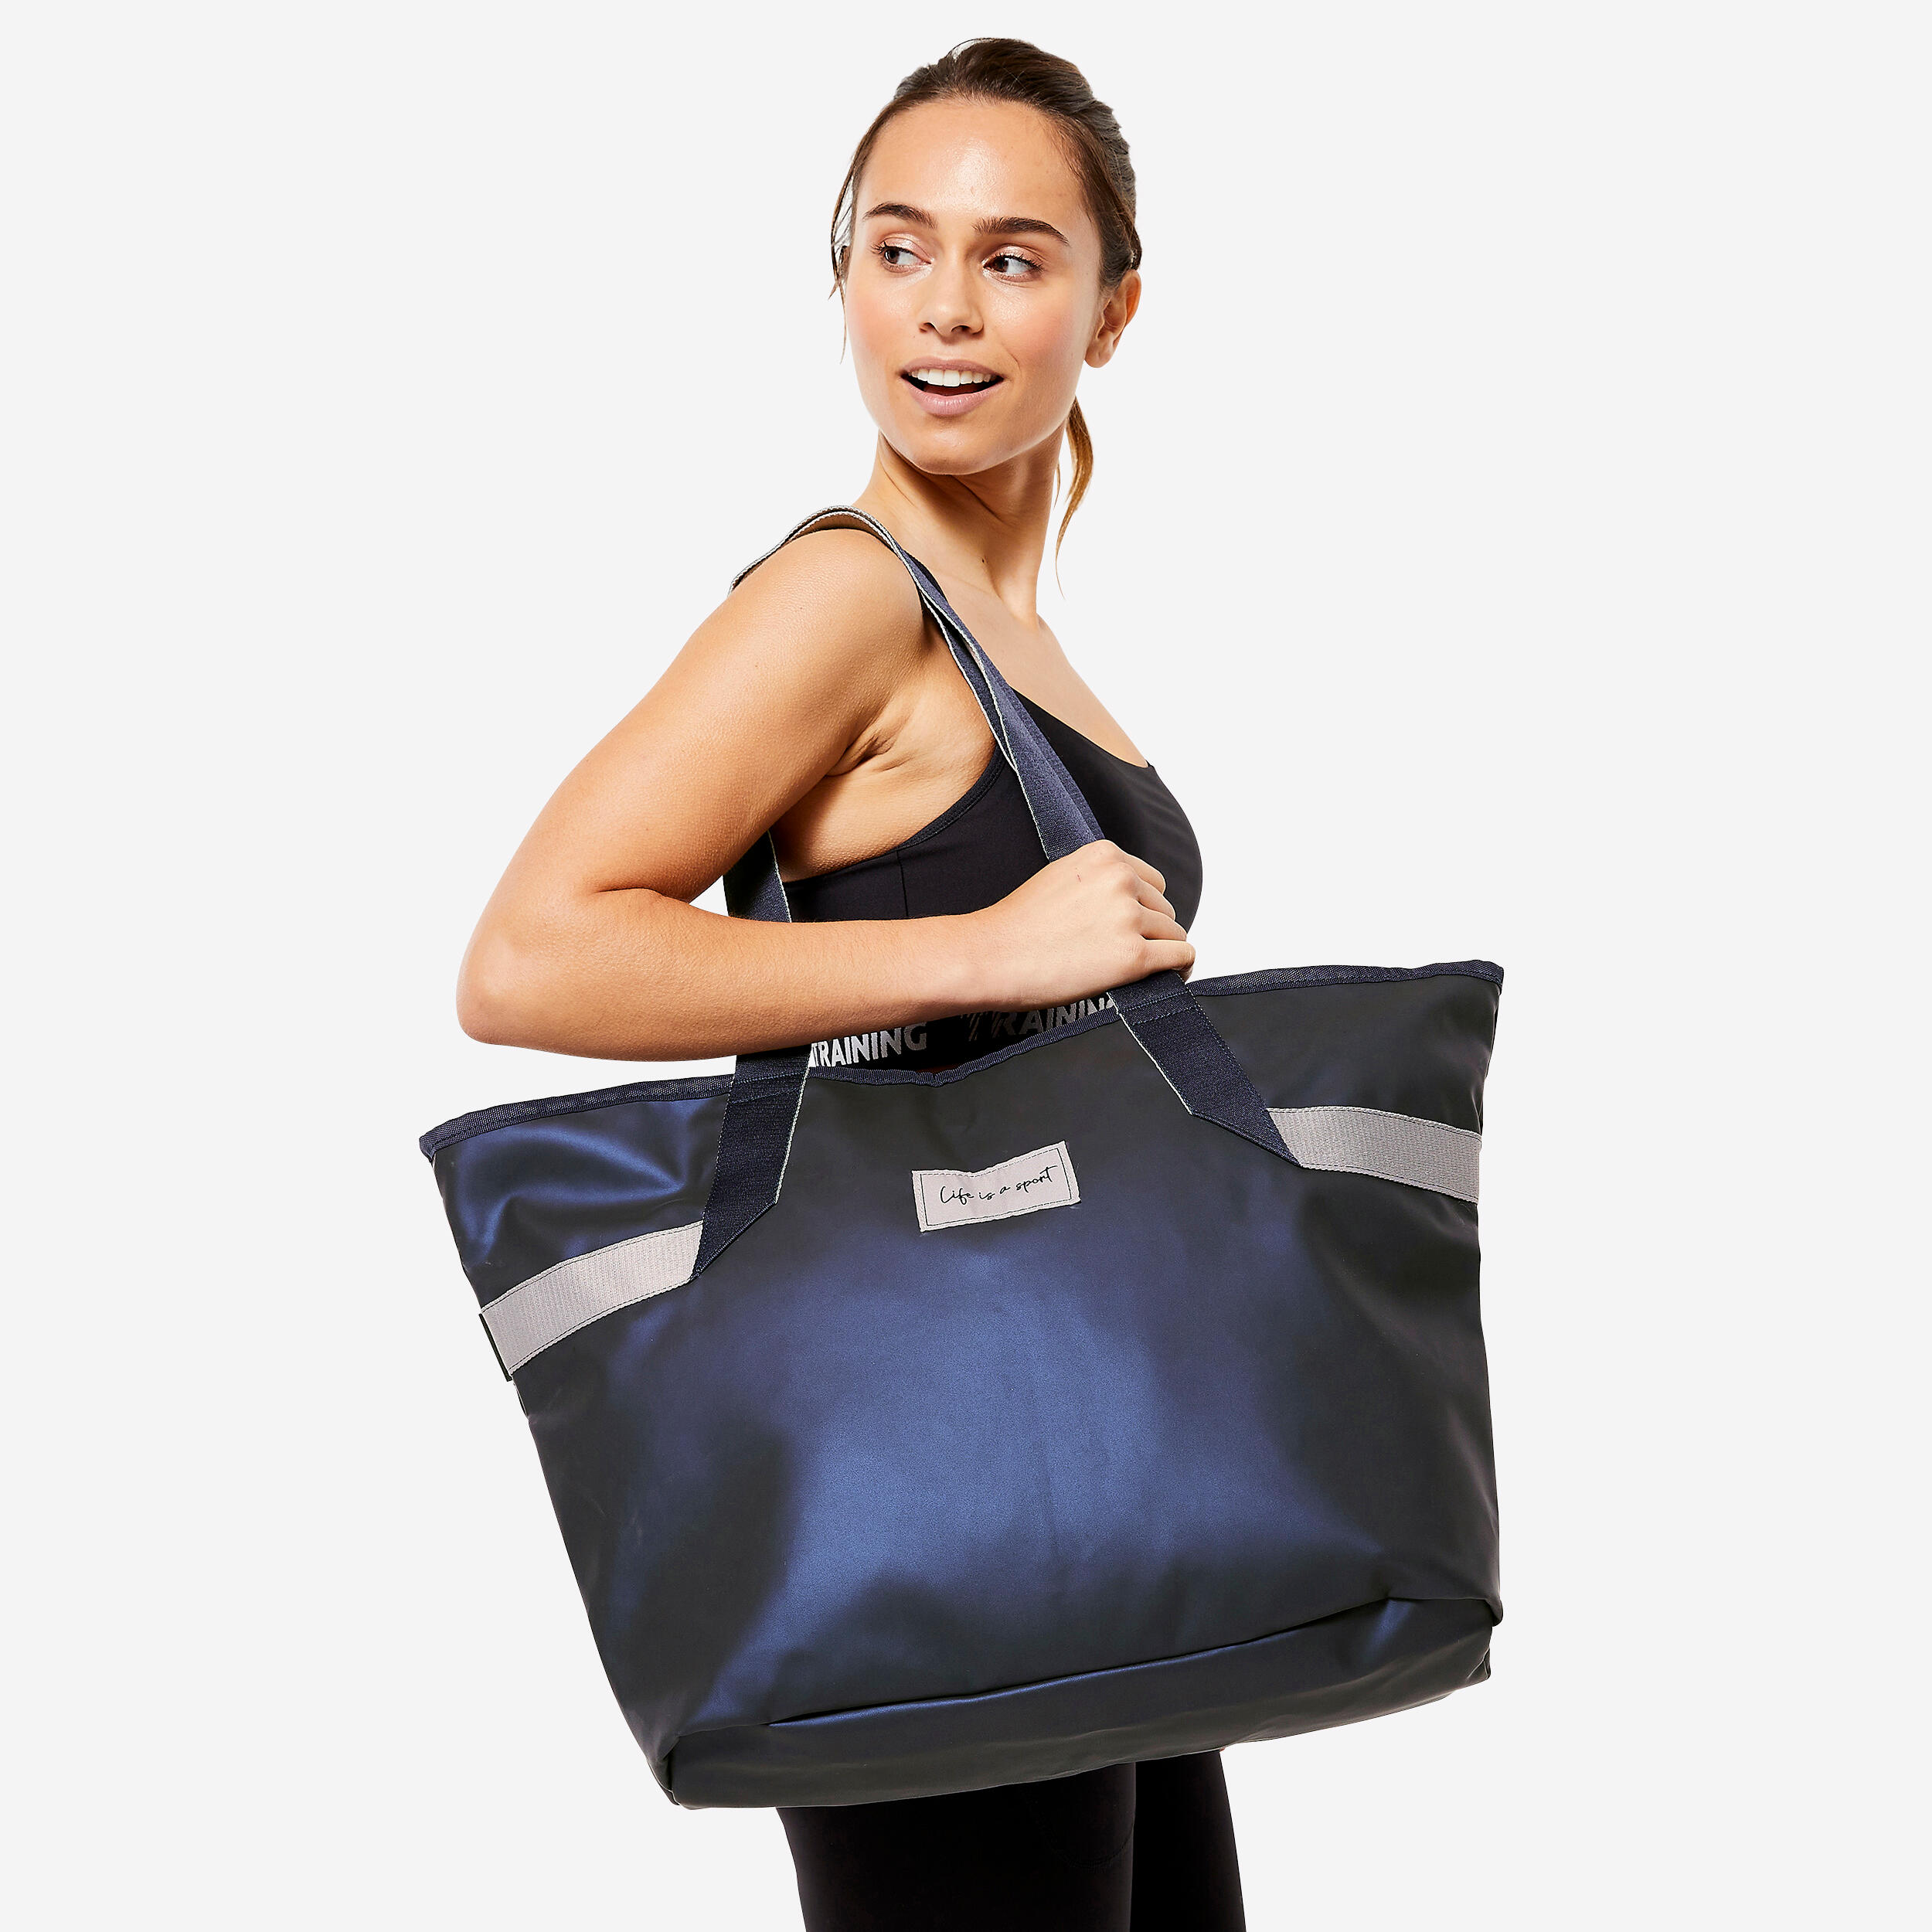 DOMYOS Women's 25 L Bag with Pockets - Navy Blue